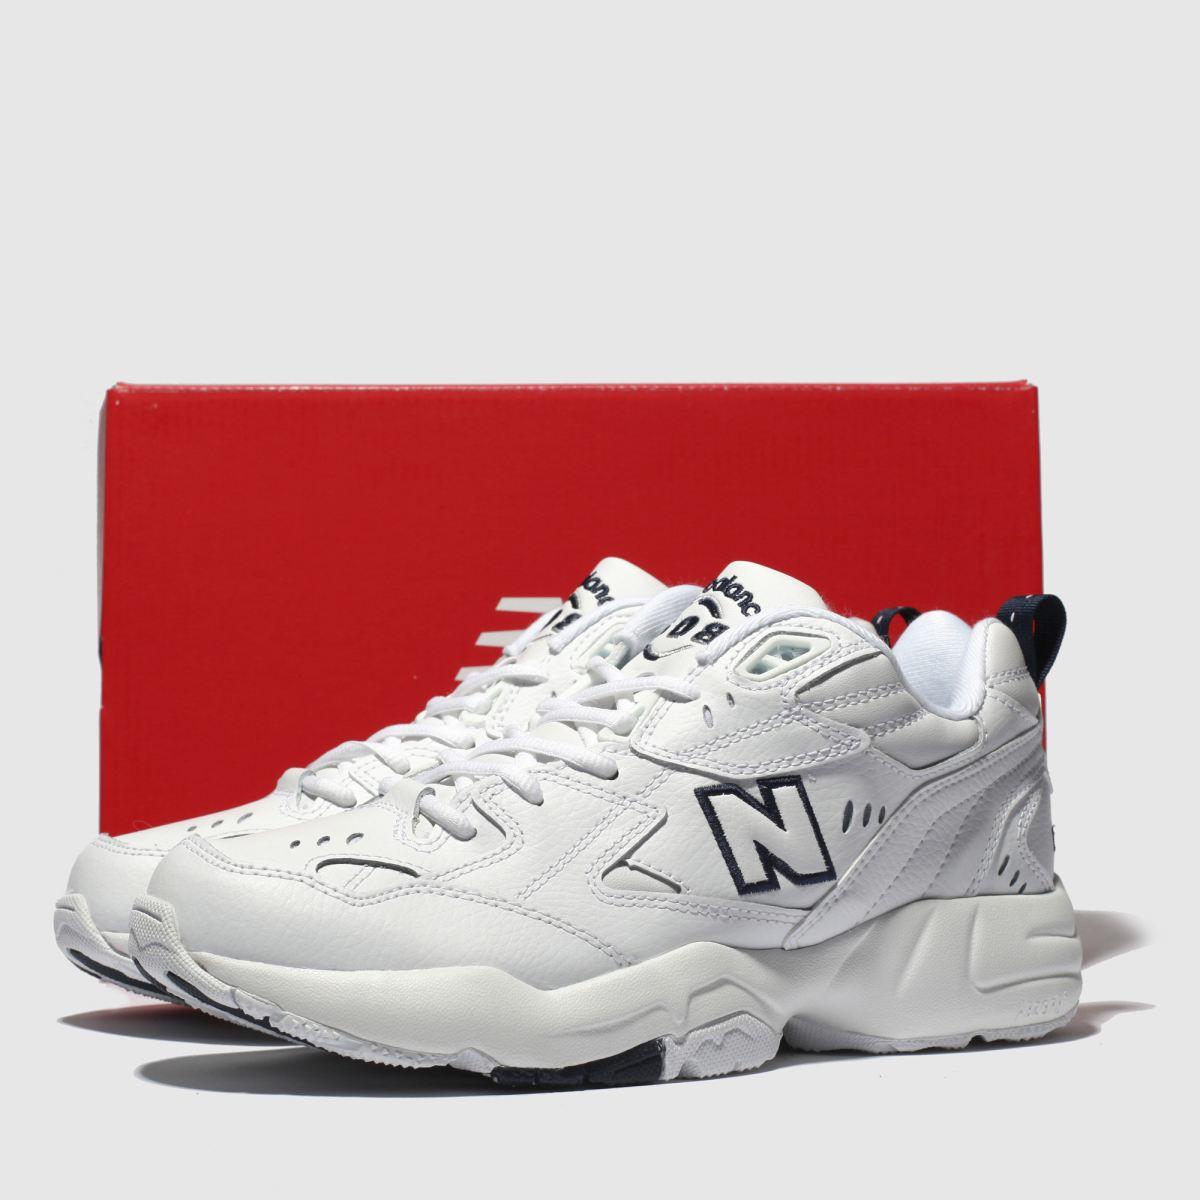 New Balance Leather 608 in wt (White) - Lyst